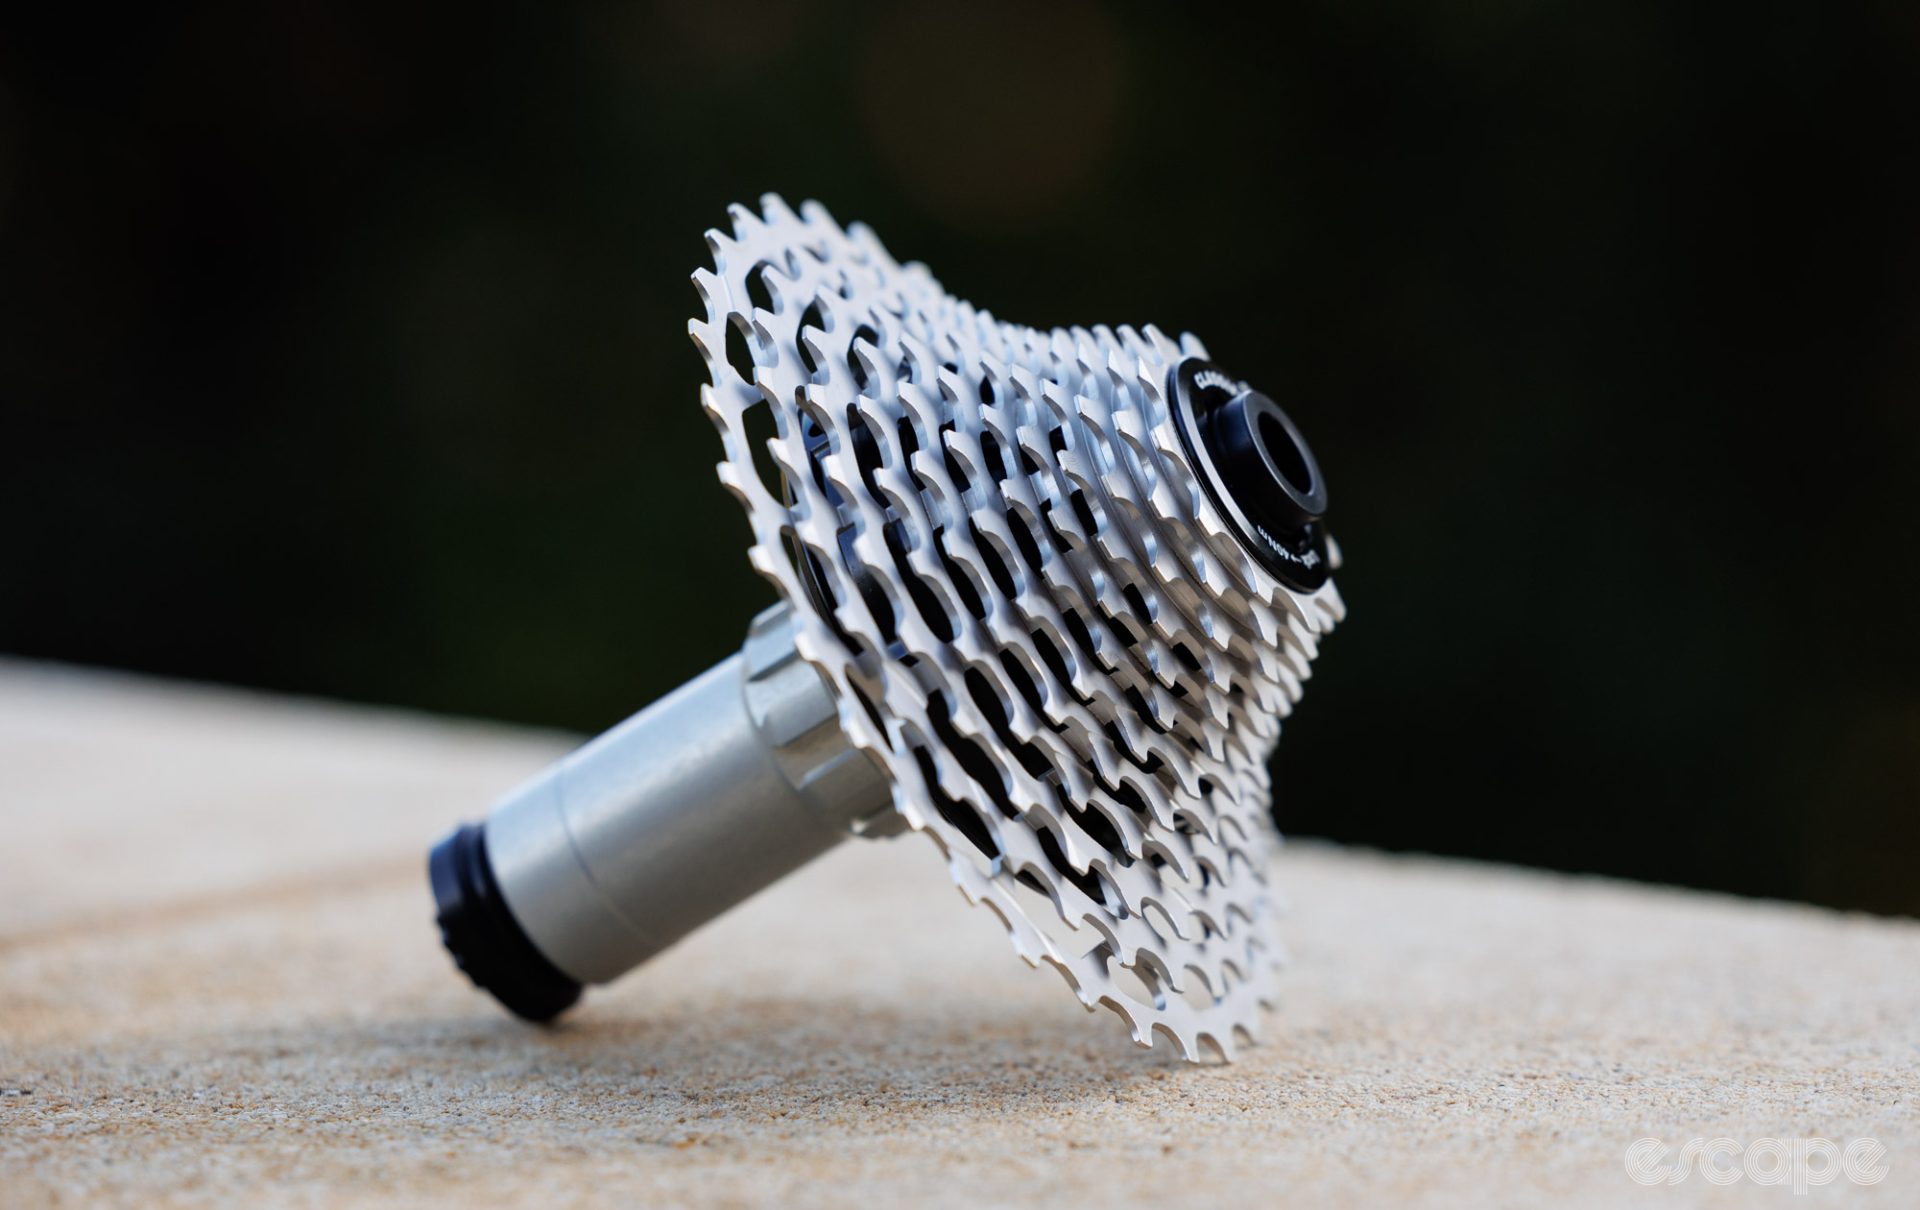 Classified's cassettes are well-made and shift reliably, but they clearly lack some of the subtle ramping and tooth profiles that manufacturers like Shimano and SRAM have that make shifts smooth and quiet.